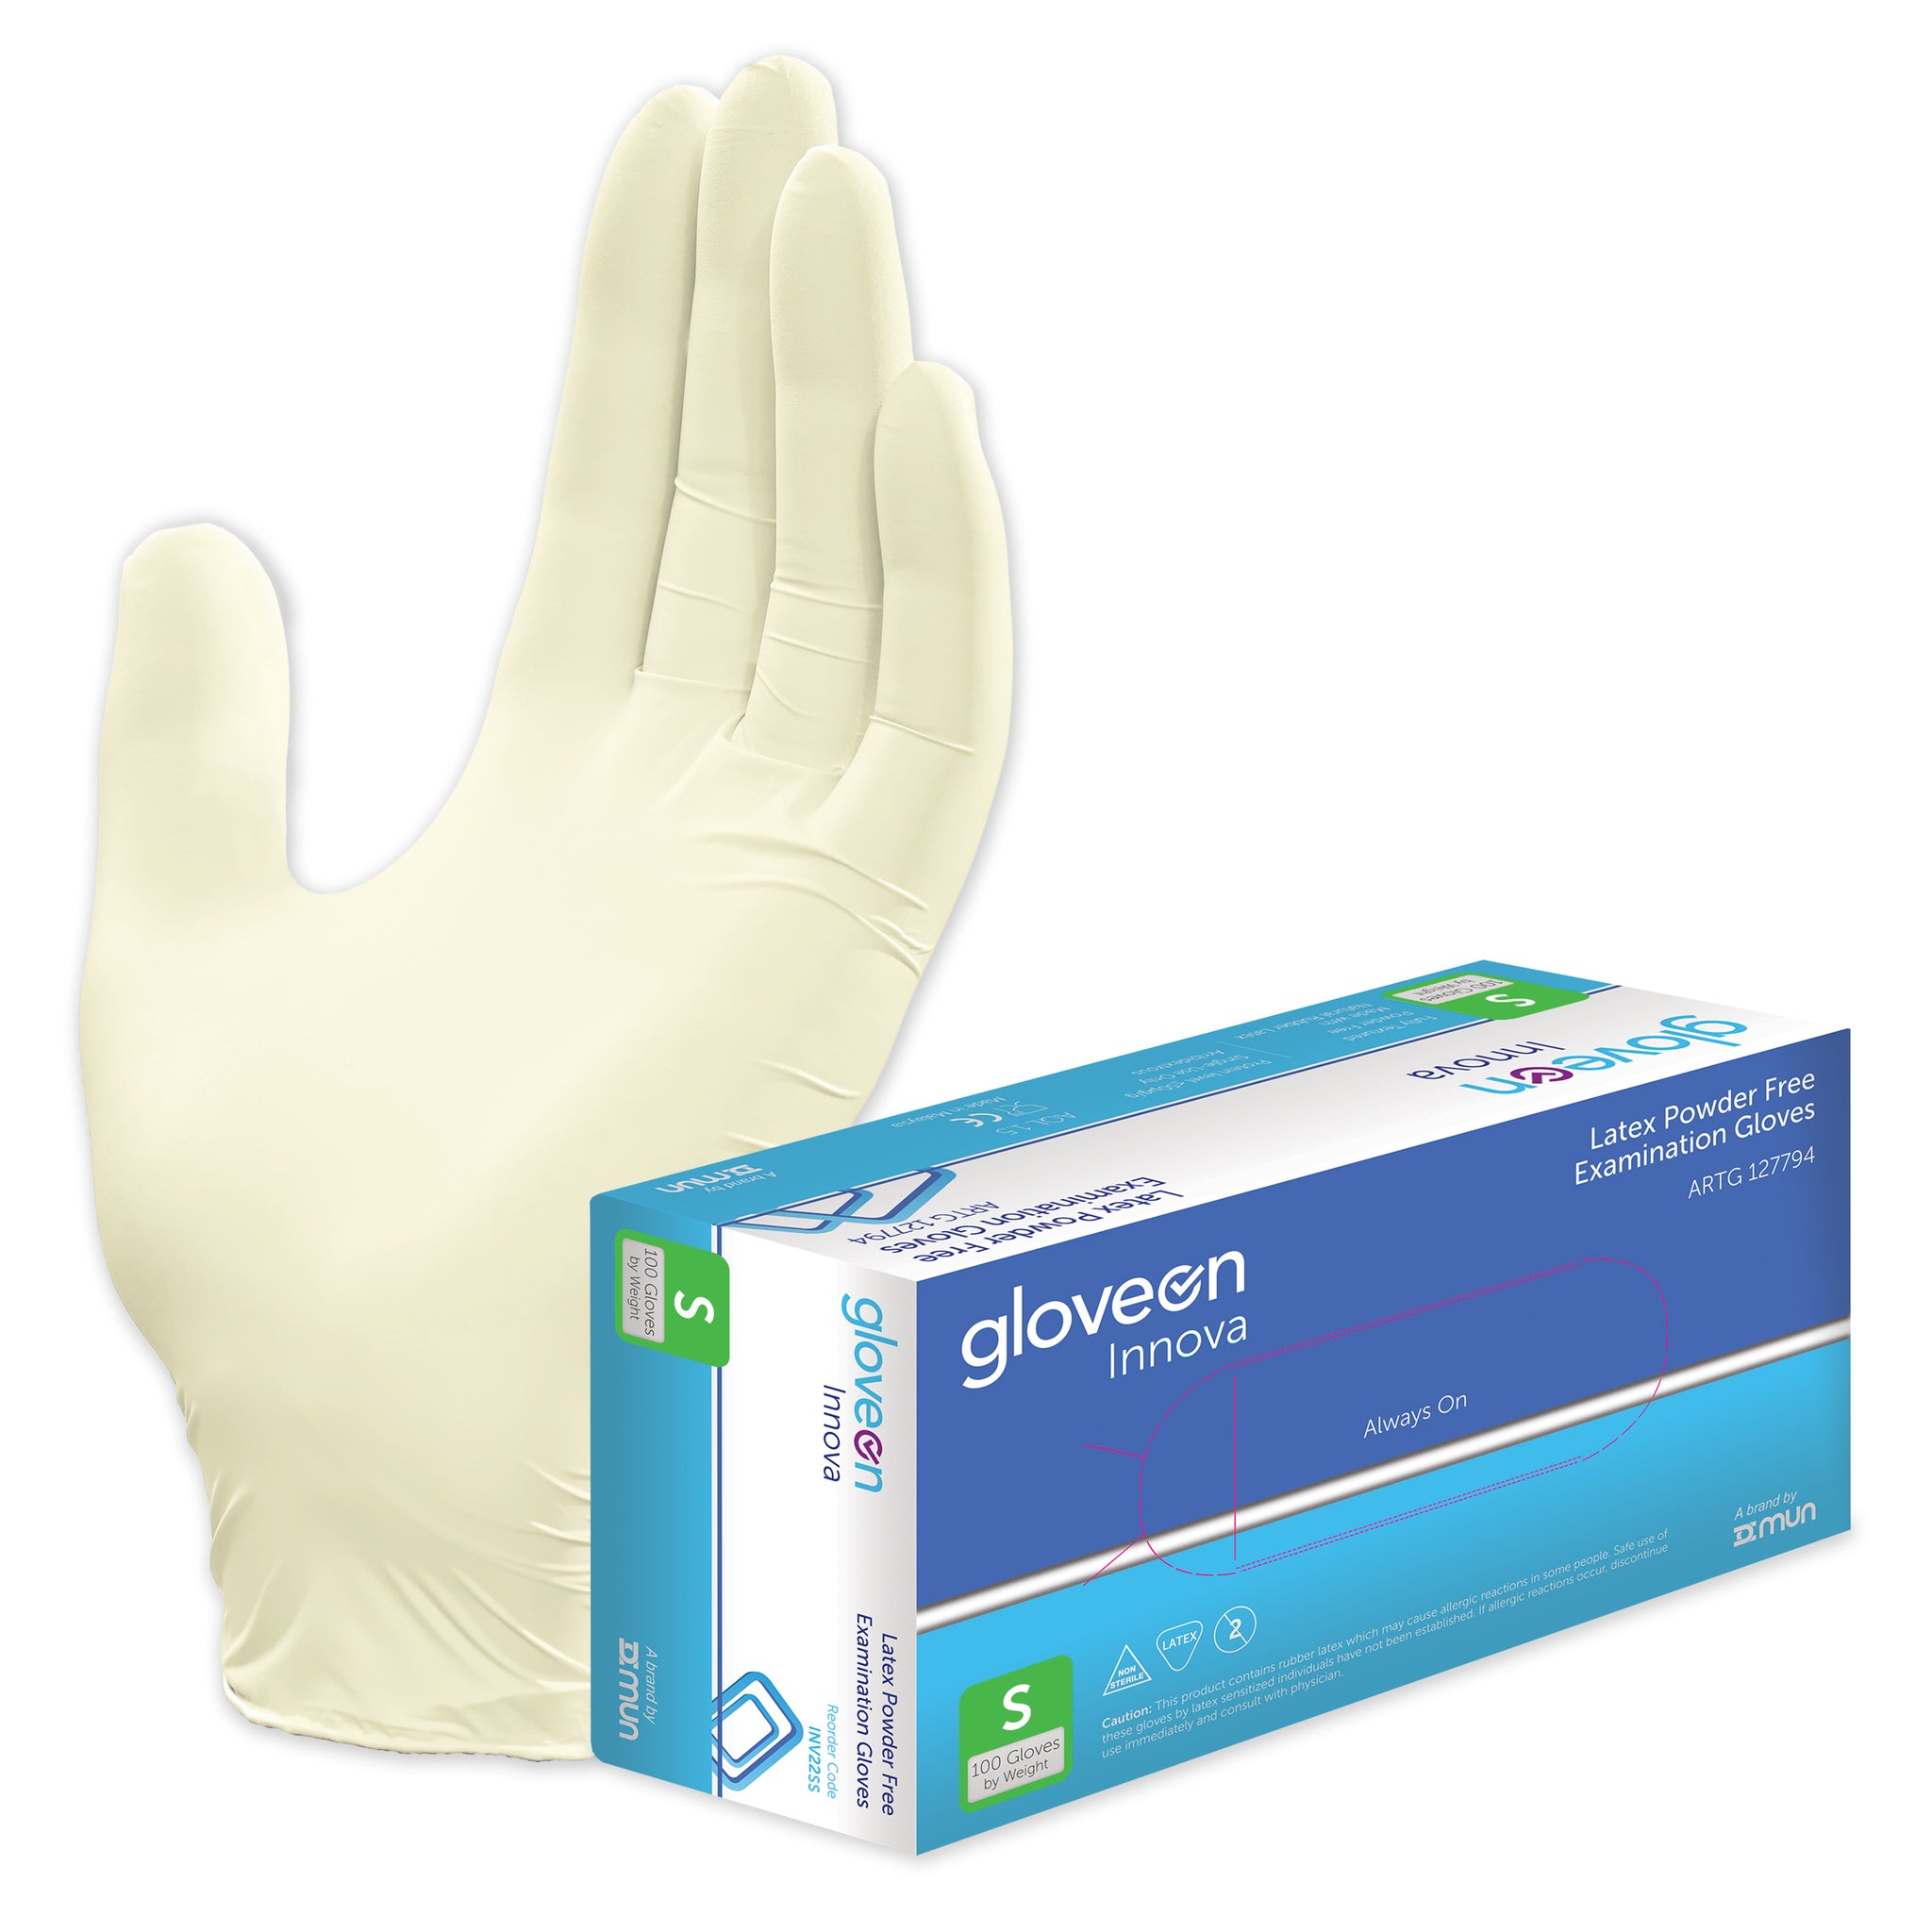 Exam Gloves, Powder Free, Non-Sterile, Fully Textured, Standard Cuff, Natural Colour - Box of 100, S